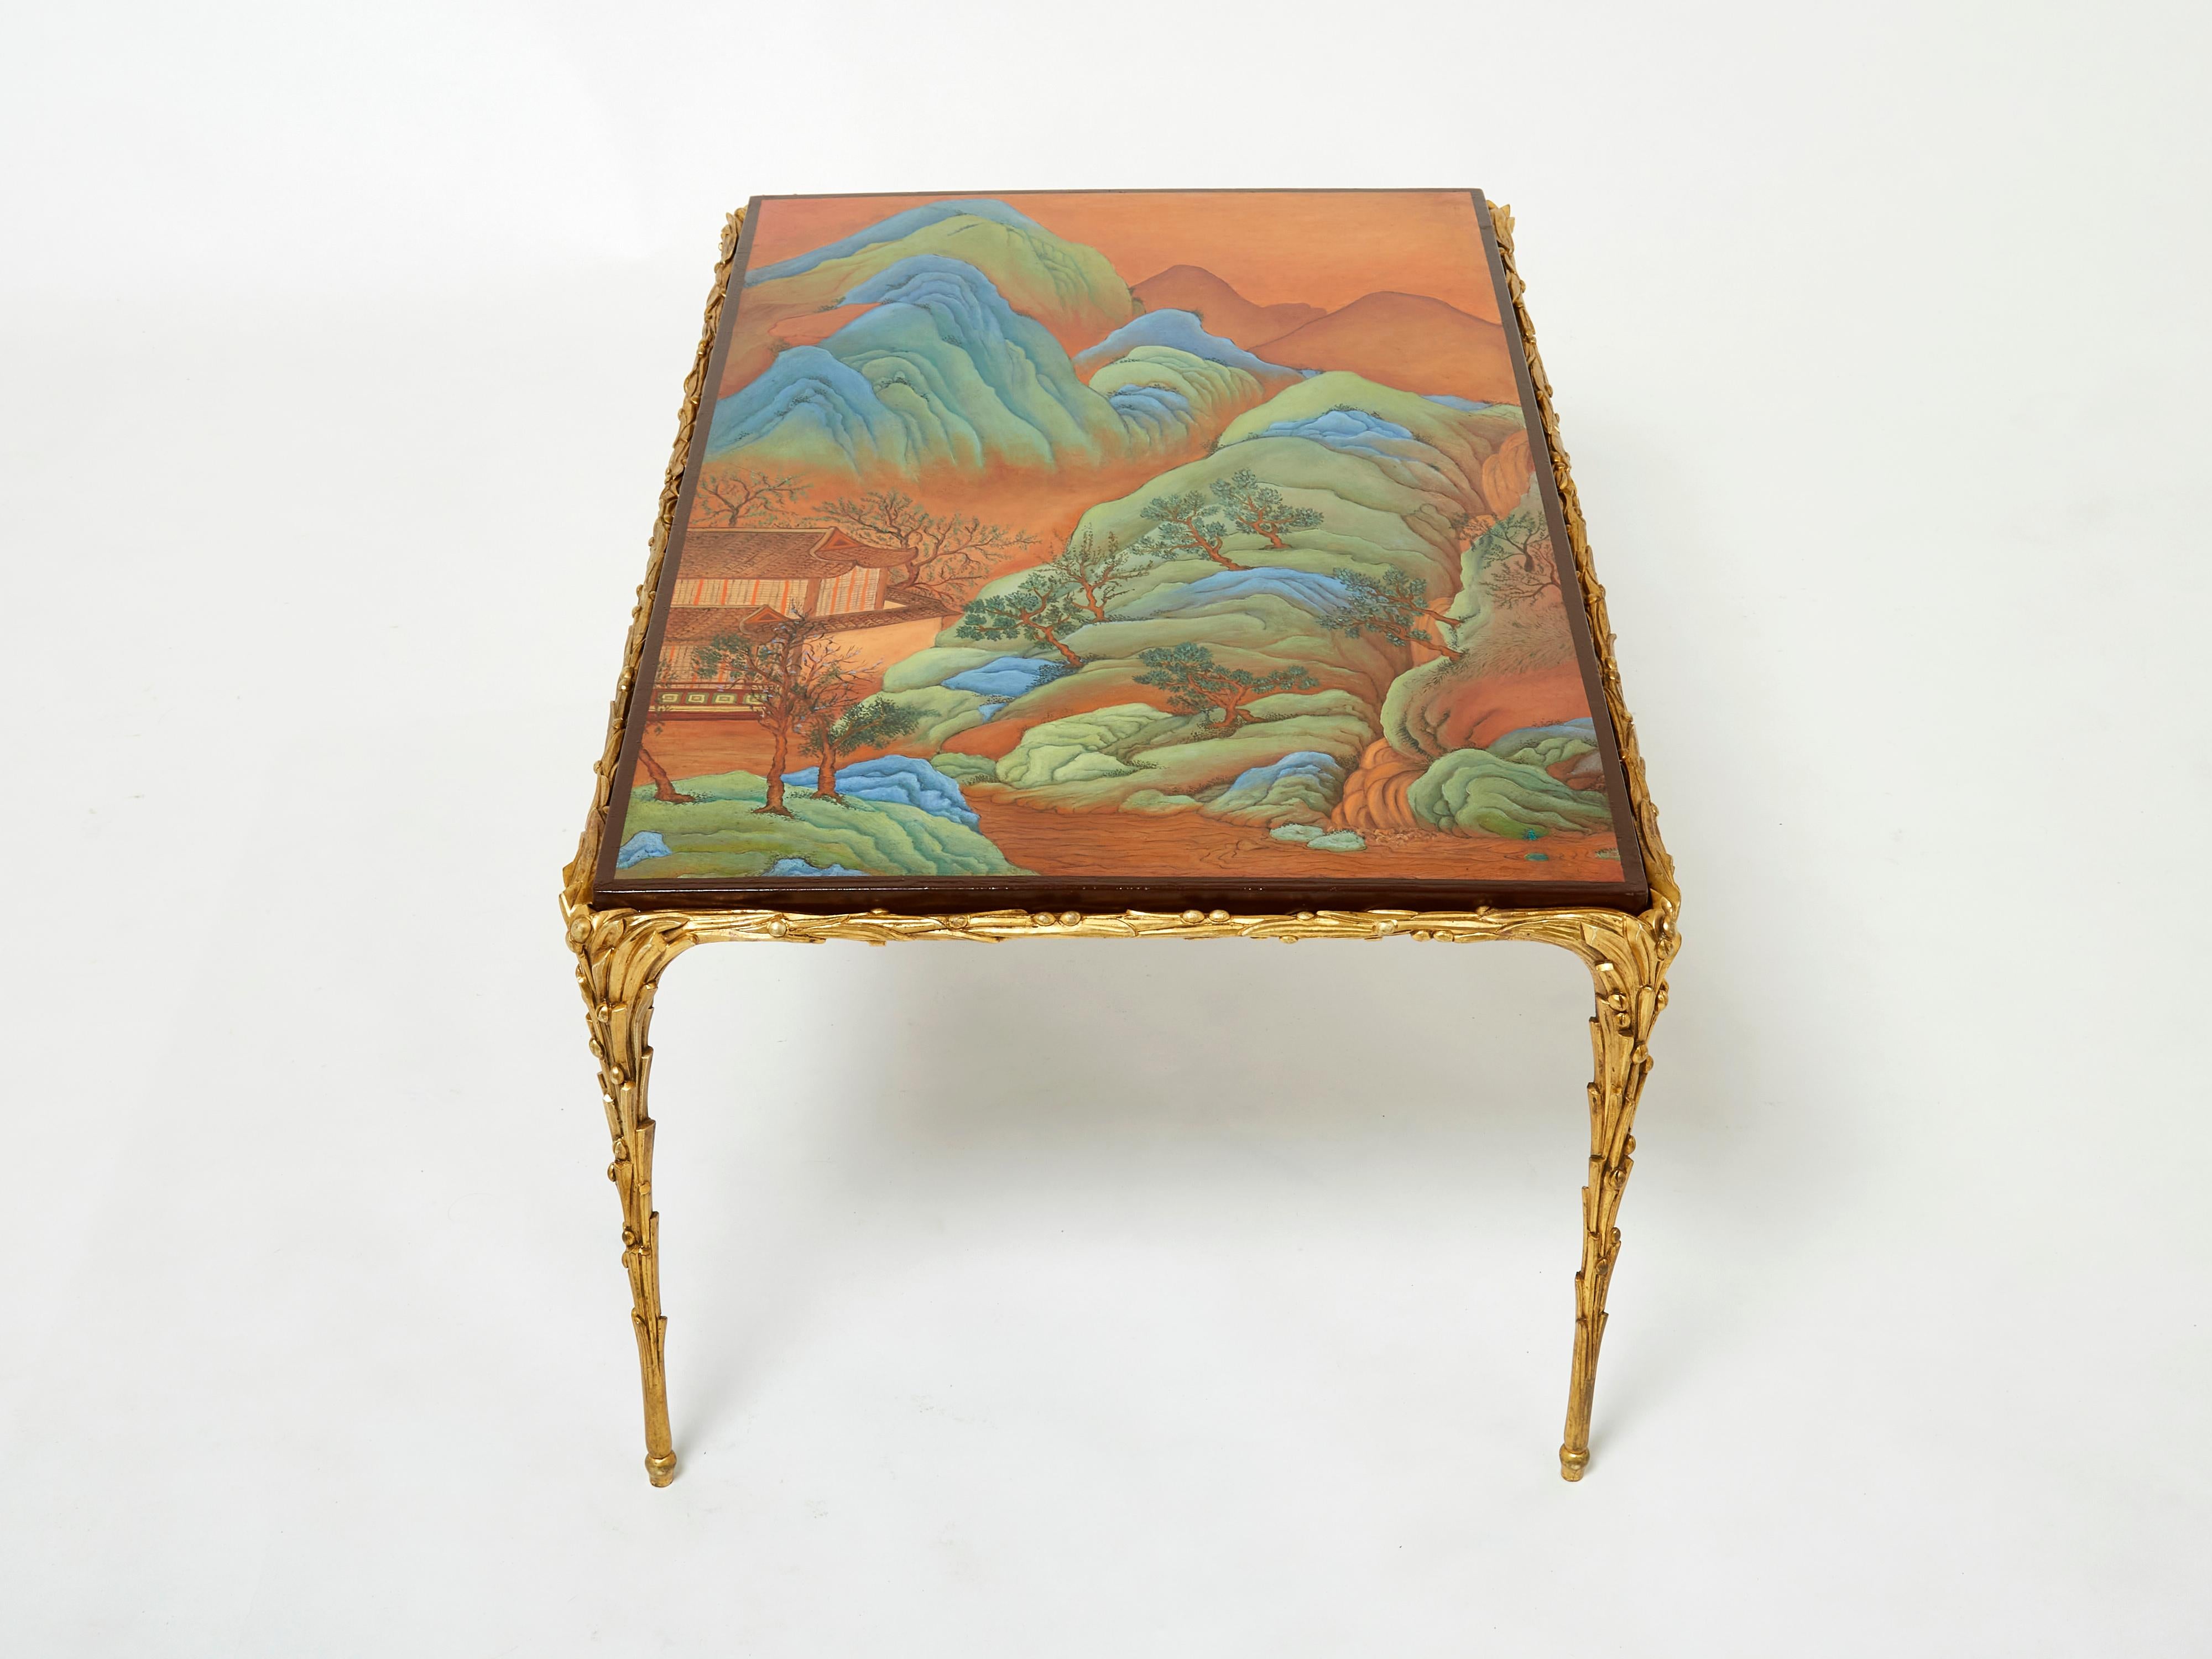 Maison Baguès foliage Bronze Chinese Lacquered Coffee Table 1960s For Sale 2